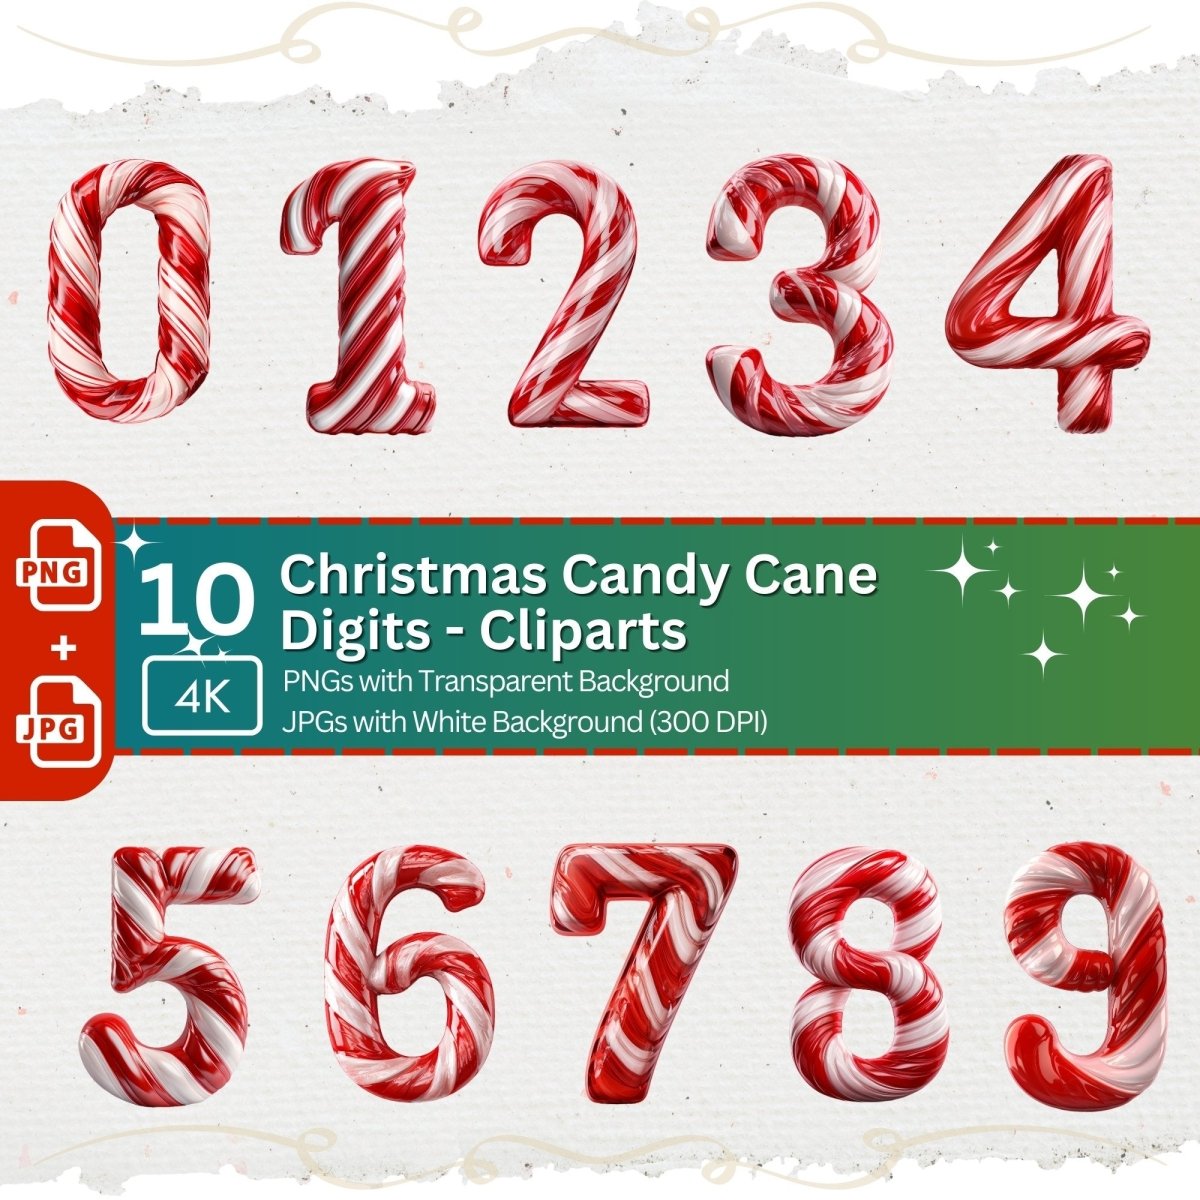 Candy Cane Numbers Clipart 10 PNG Bundle Christmas Sweet Font Clipart Card Making Graphic Digital Paper Craft Holiday Digit Graphic - Everything Pixel